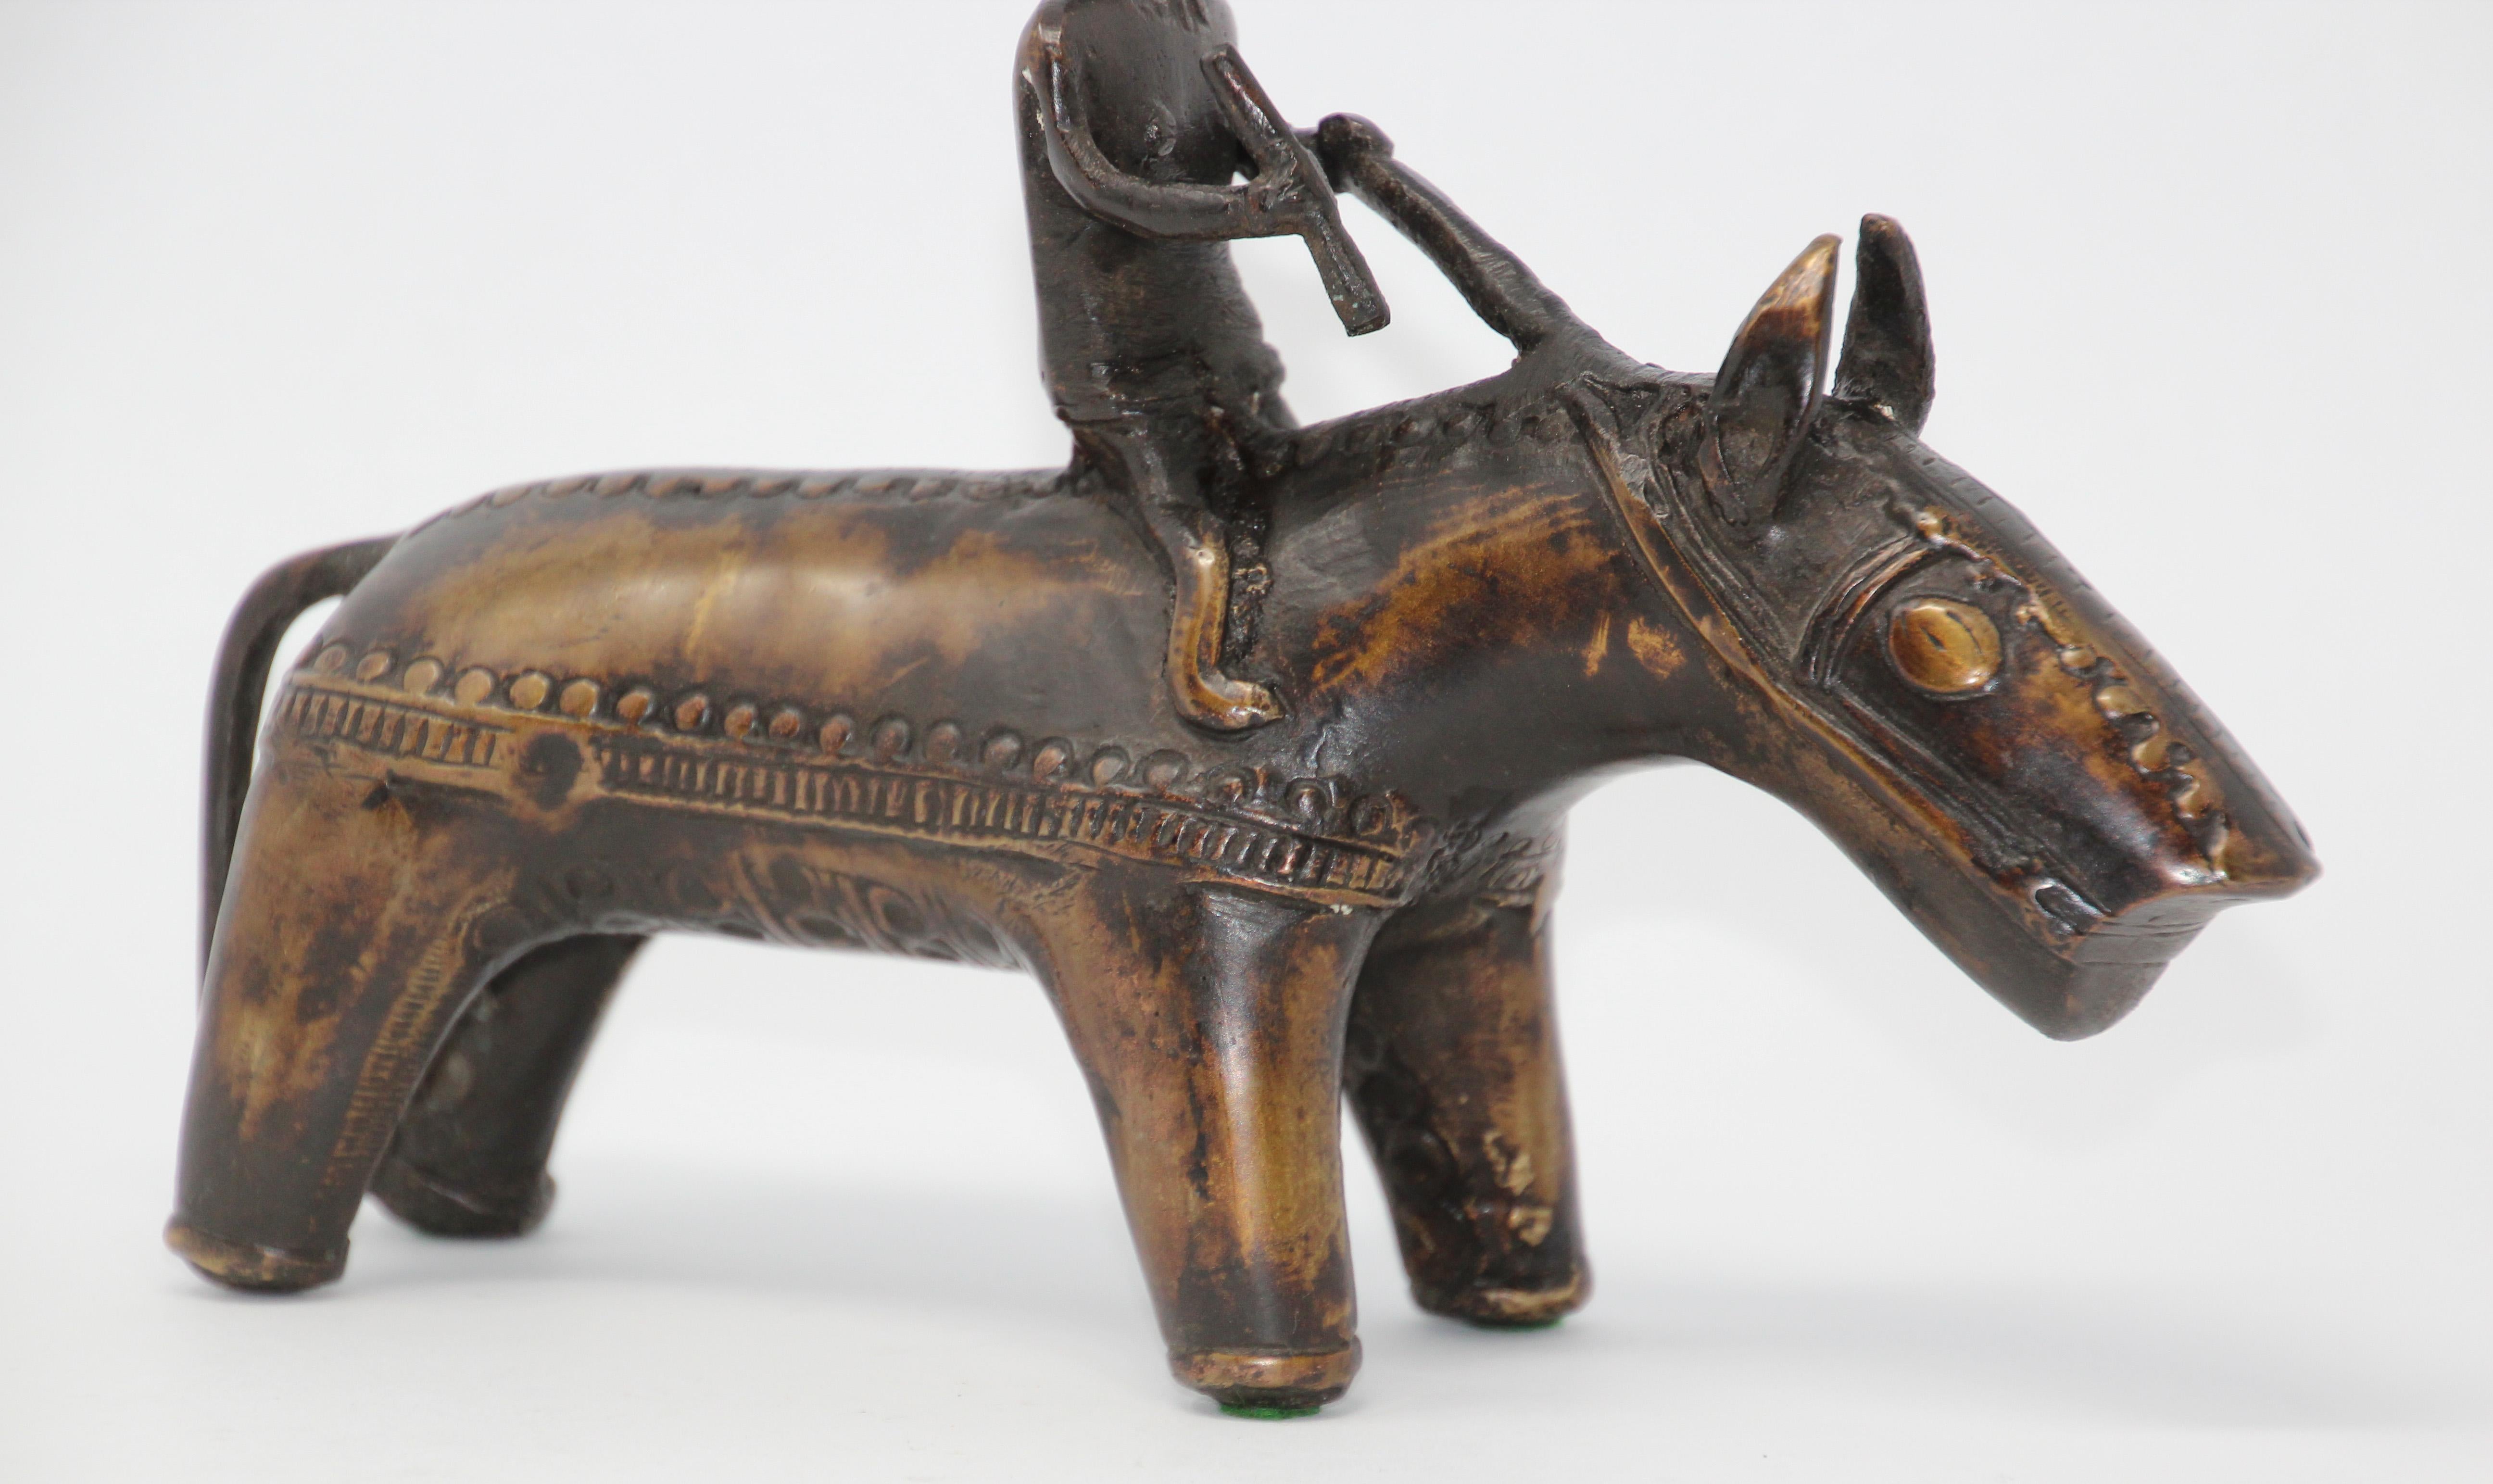 Wonderful decorative and heavy cast brass of a warrior horse or beast rider.
The horse and warrior are very modern tribal elongated form.
The tribal horse sculpture was produced using the traditional 'lost wax' process.
Lost wax method is the